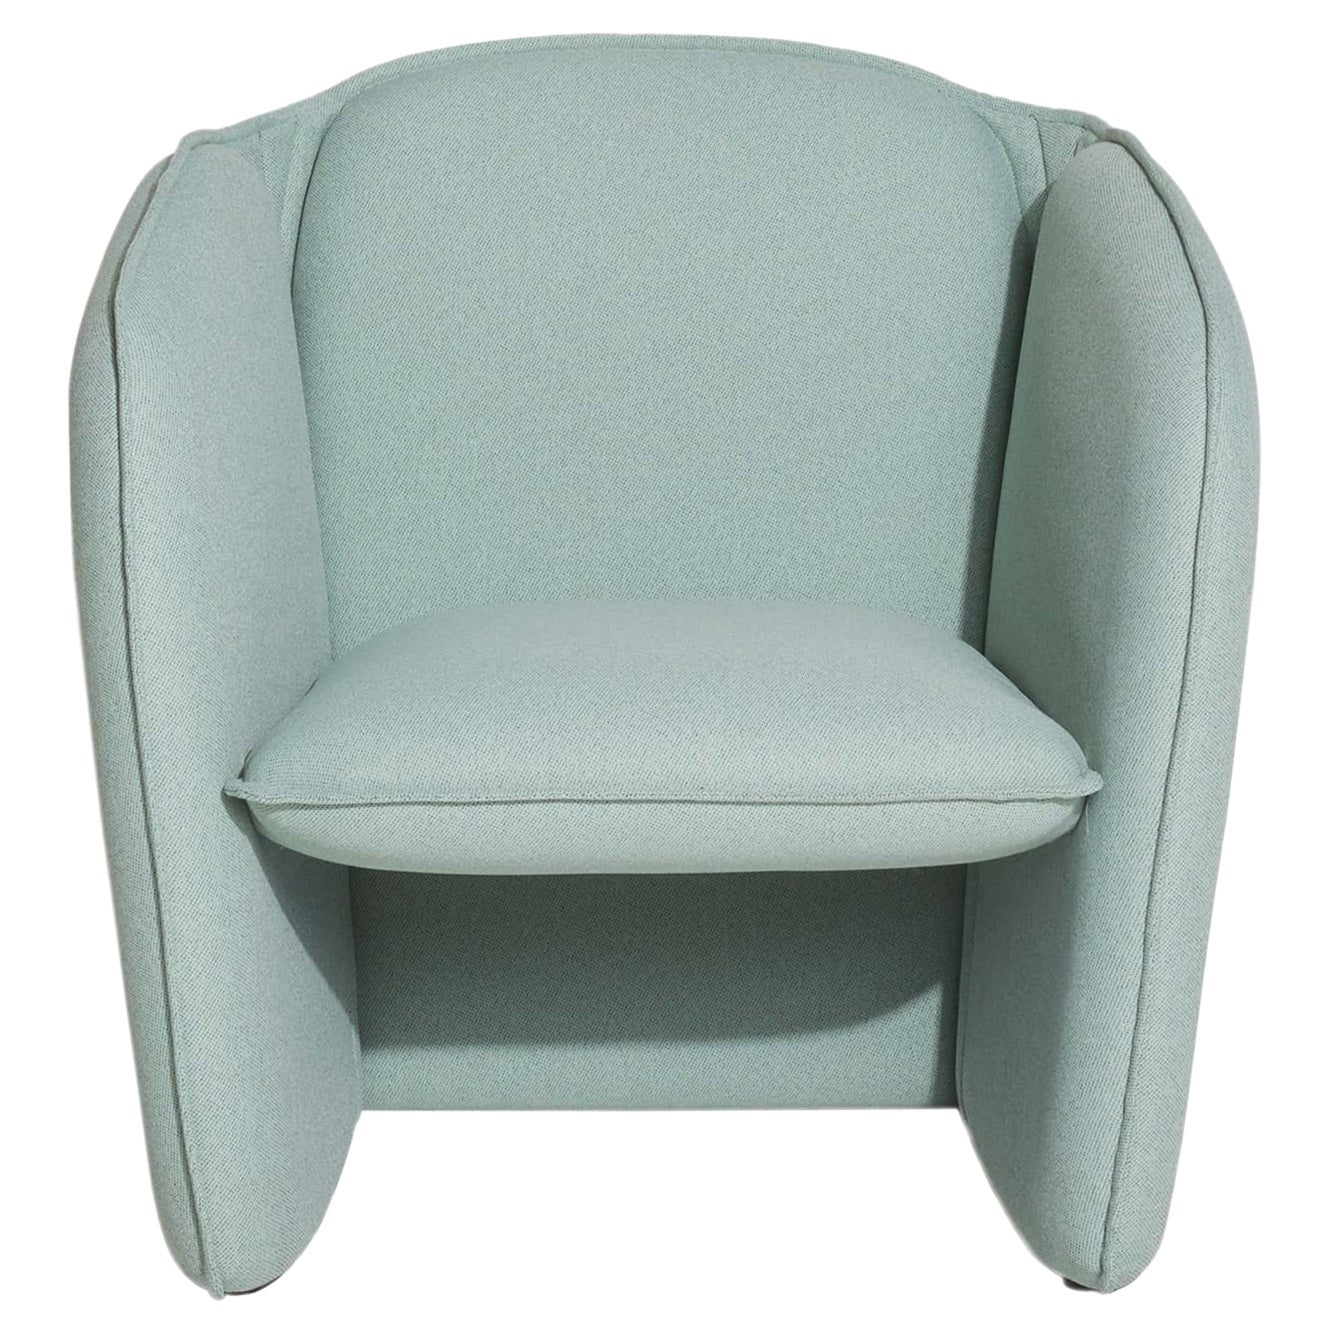 Petite Friture Lily Armchair in Light Blue by Färg & Blanche, 2022 For Sale